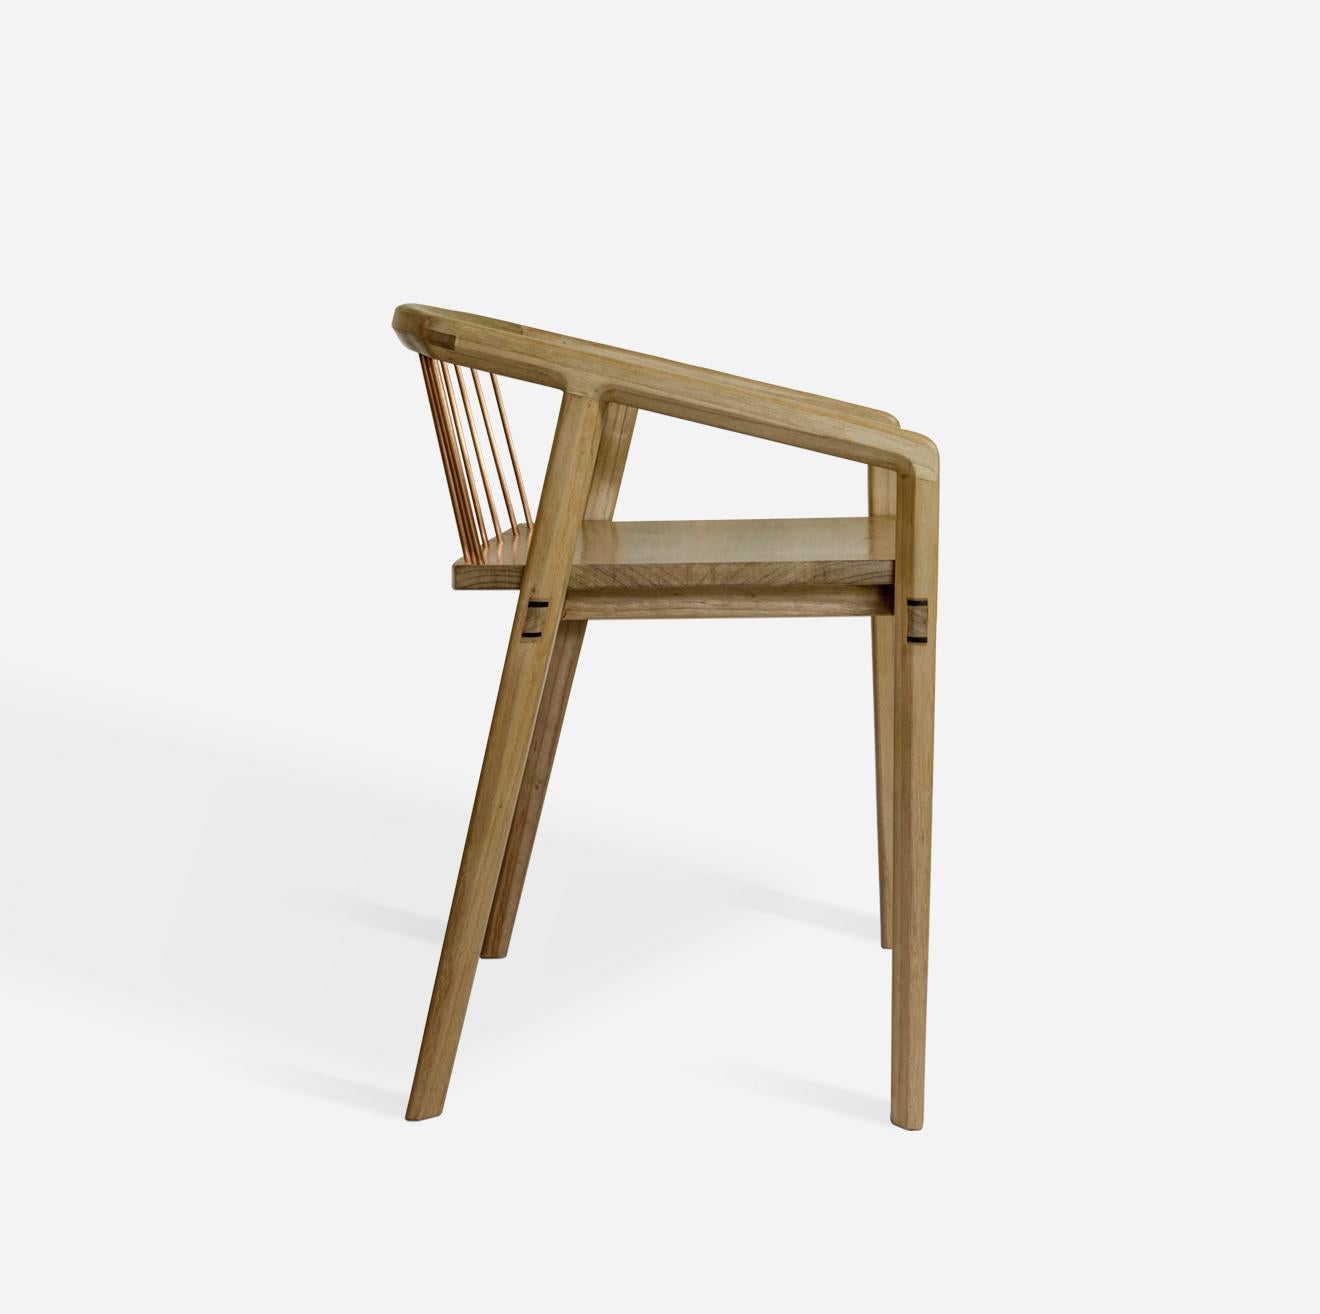 Hand-Crafted 'Canelinha' Mid-Century Modern Chair in Brazilian Hardwood by Knót Artesanal For Sale